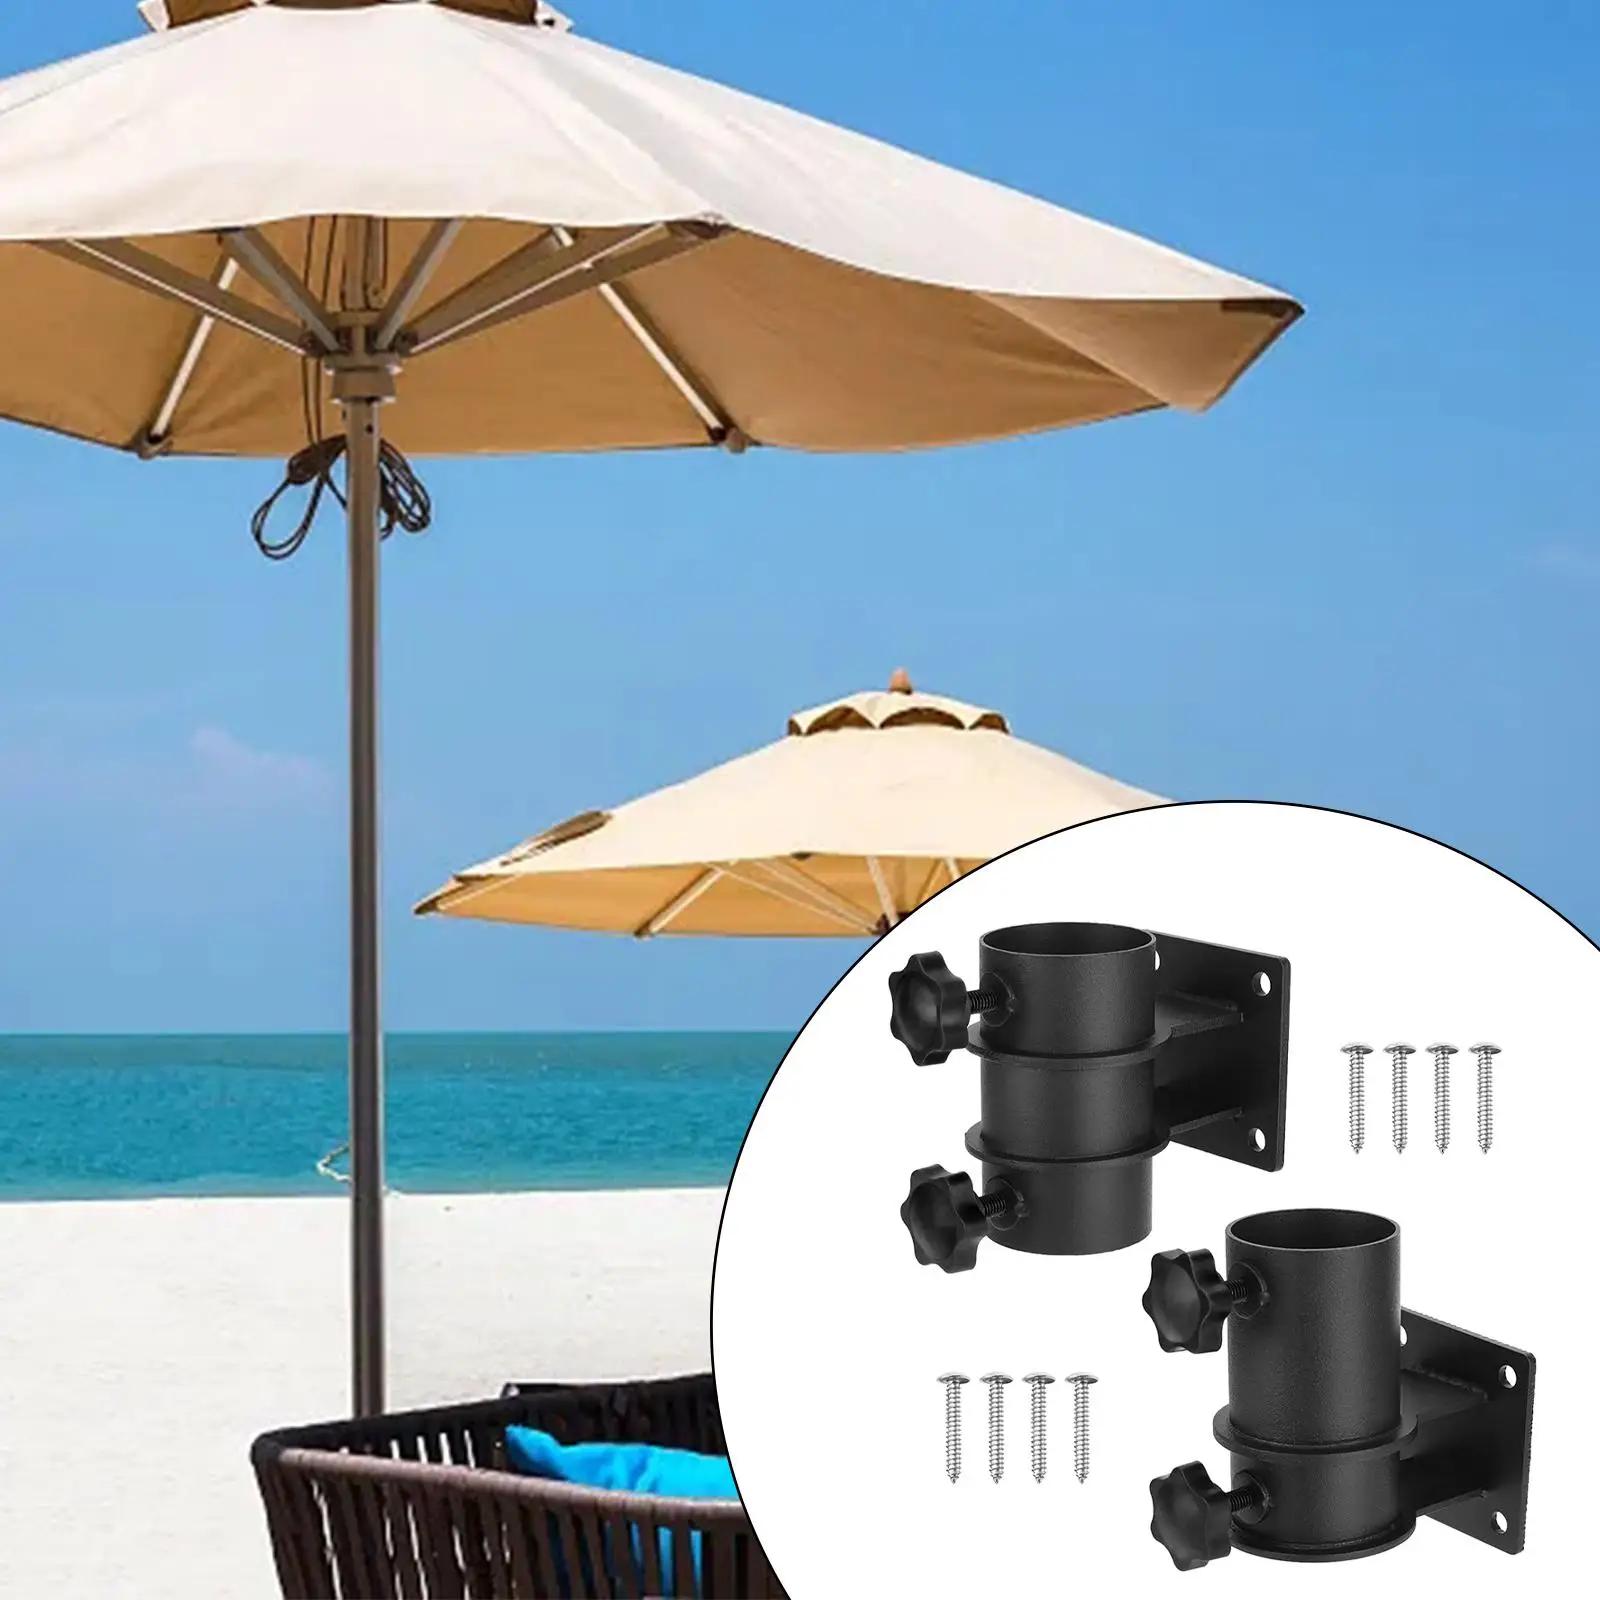 Umbrella Base Stand Fits 30-50mm Pole Sun Shelter Sun Umbrella Holder Parasol Umbrella Mount Parts for Courtyard Attachments